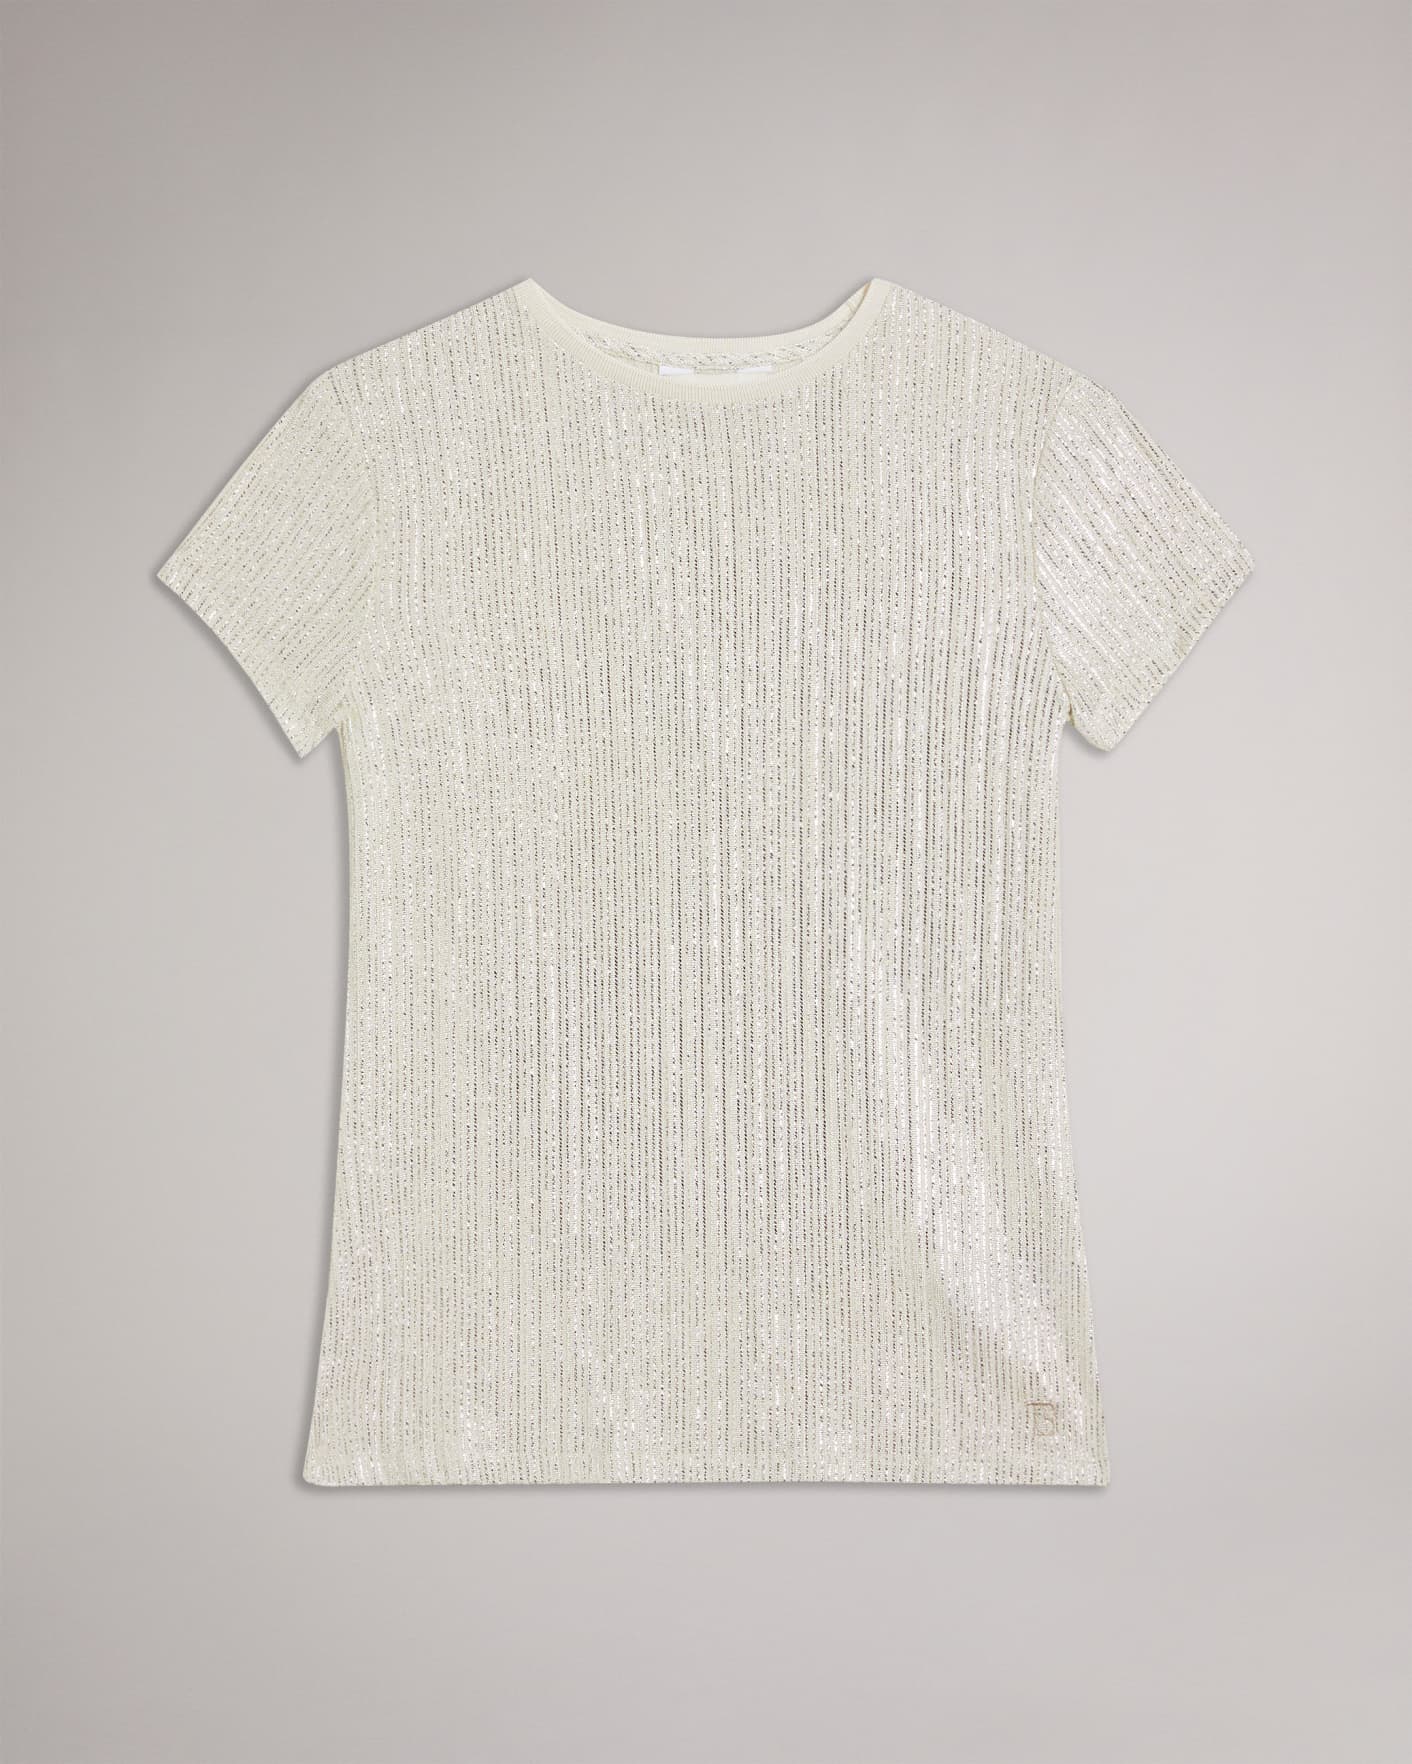 IVORY Metallic Fitted T Shirt Ted Baker